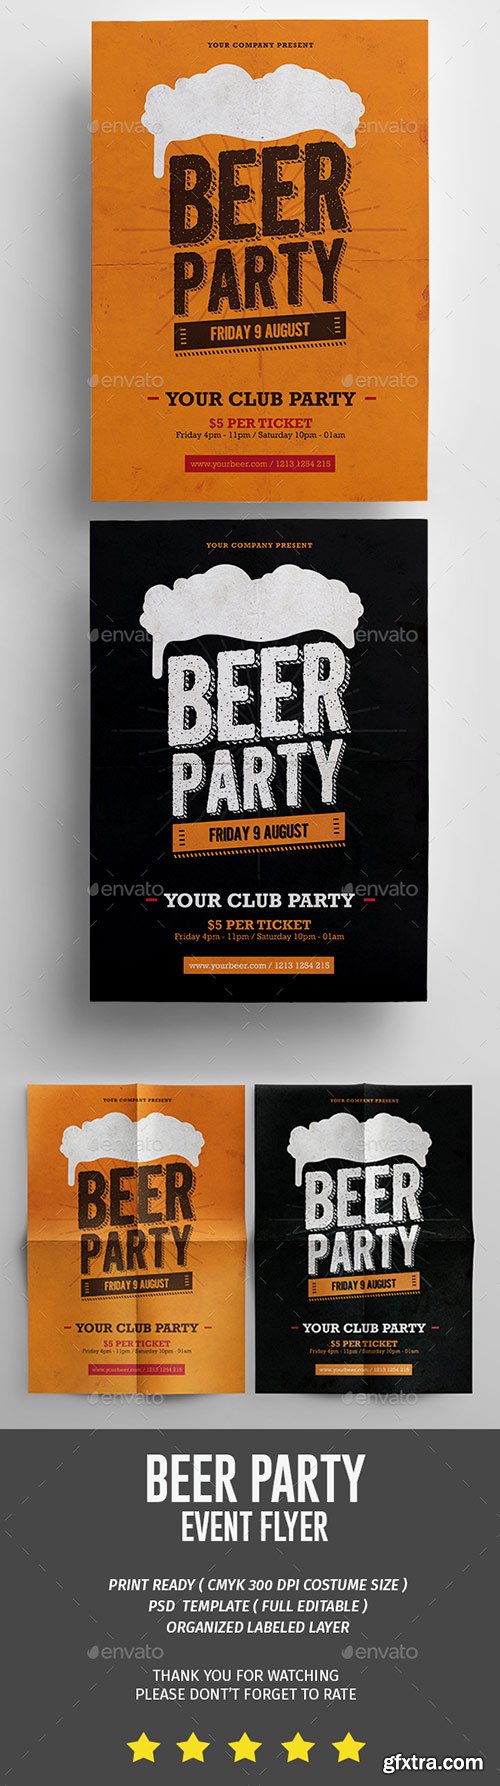 Graphicriver - Beer Party Flyer 16725048